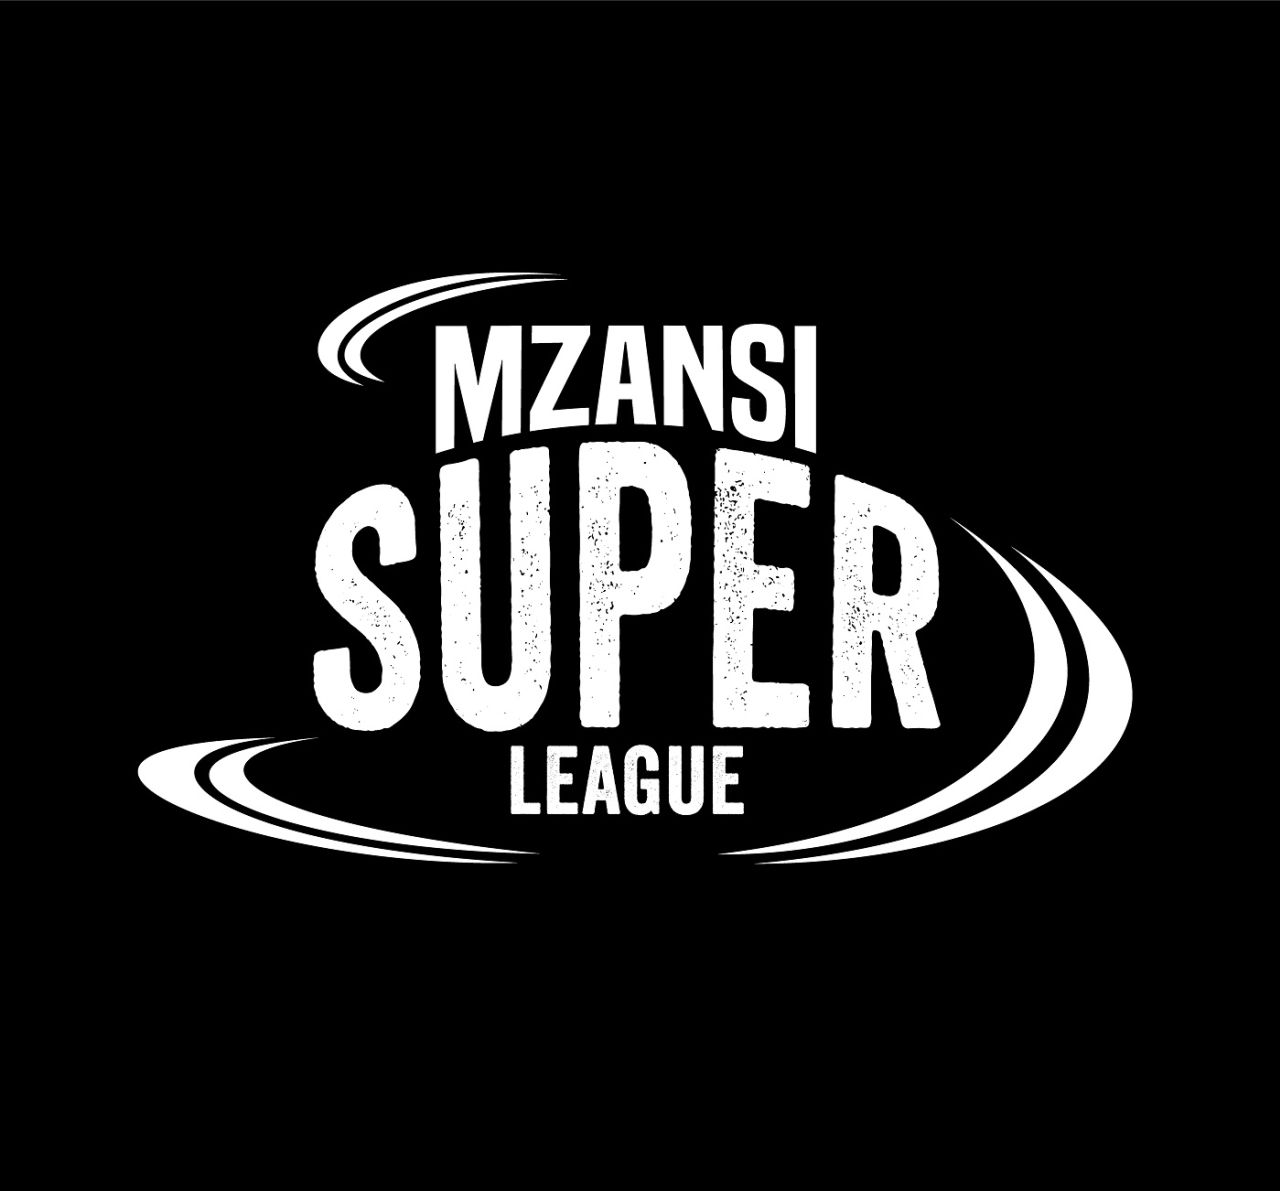 The official logo of the Mzansi Super League unveiled by Cricket South Africa, October 12, 2018